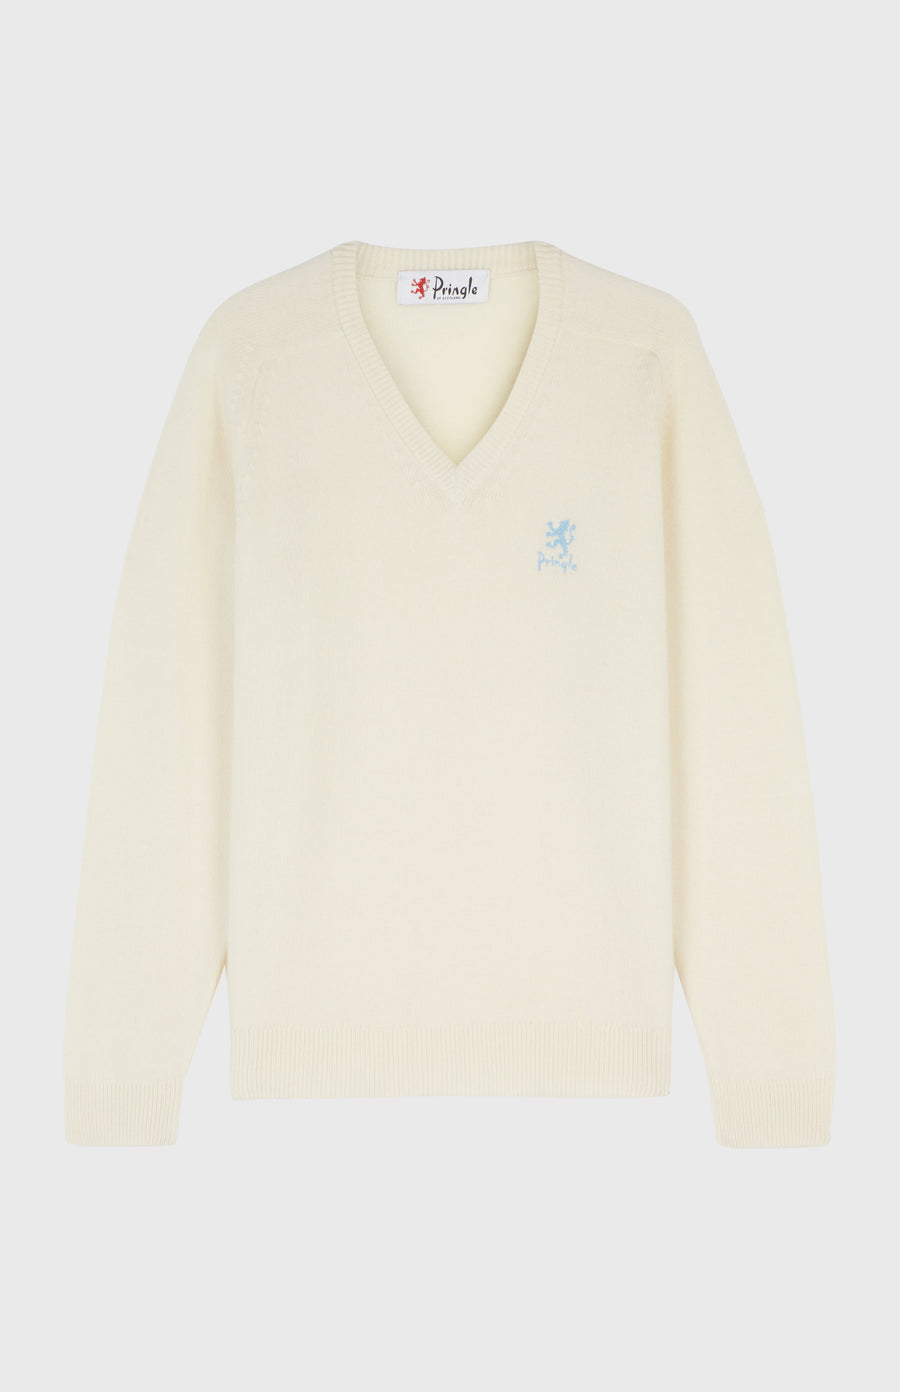 Pringle of Scotland | Archive Lambswool Blend Jumper In Ivory